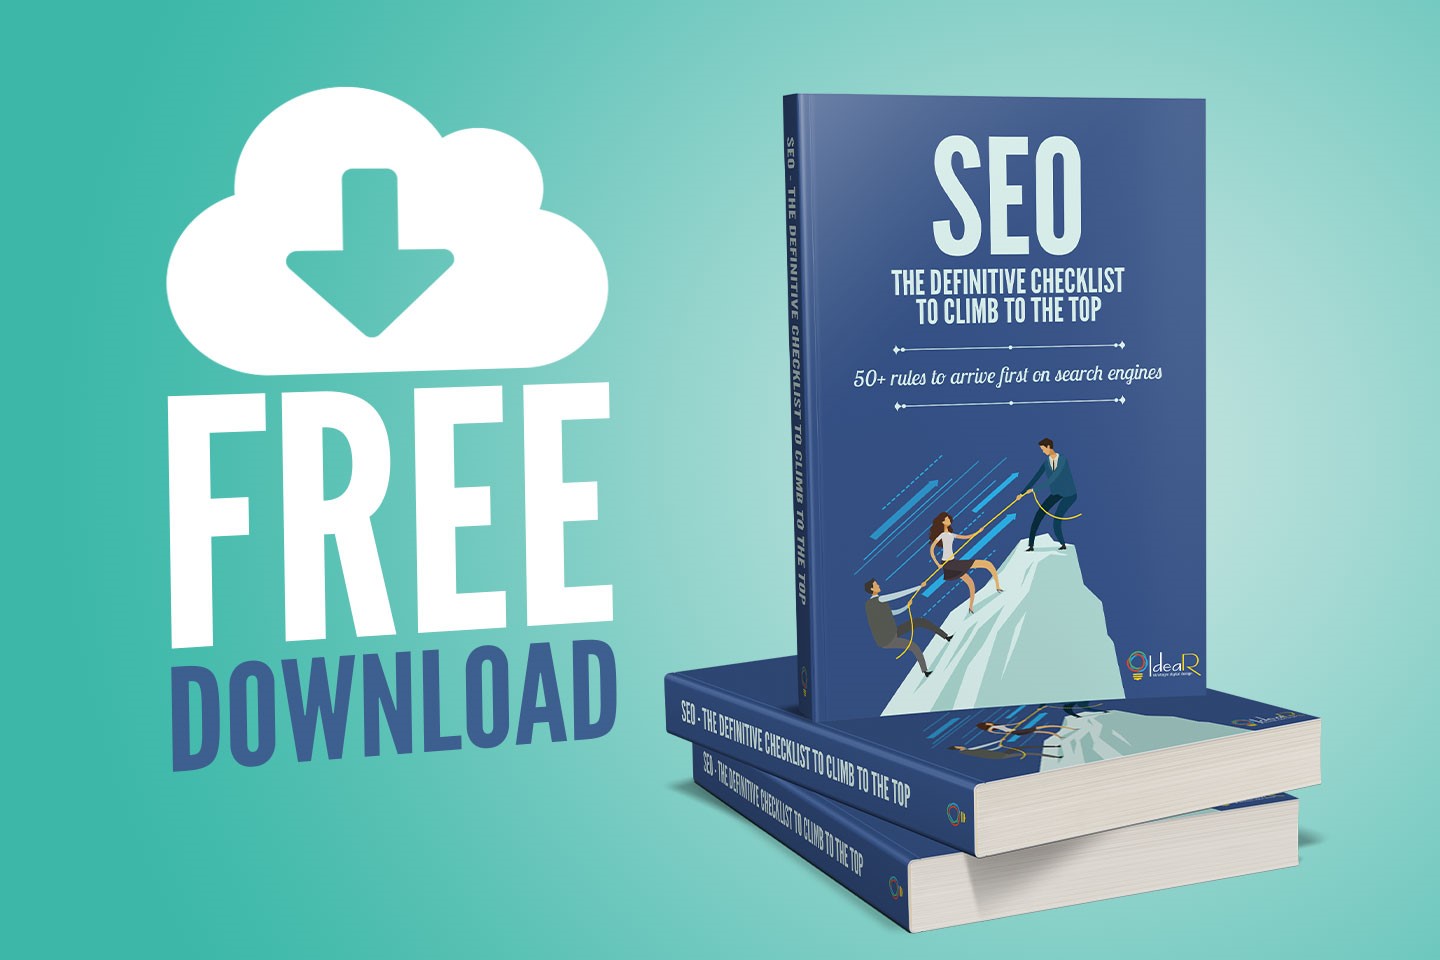 [Free eBook] 50+ tips for getting first on search engines and overtake the competition